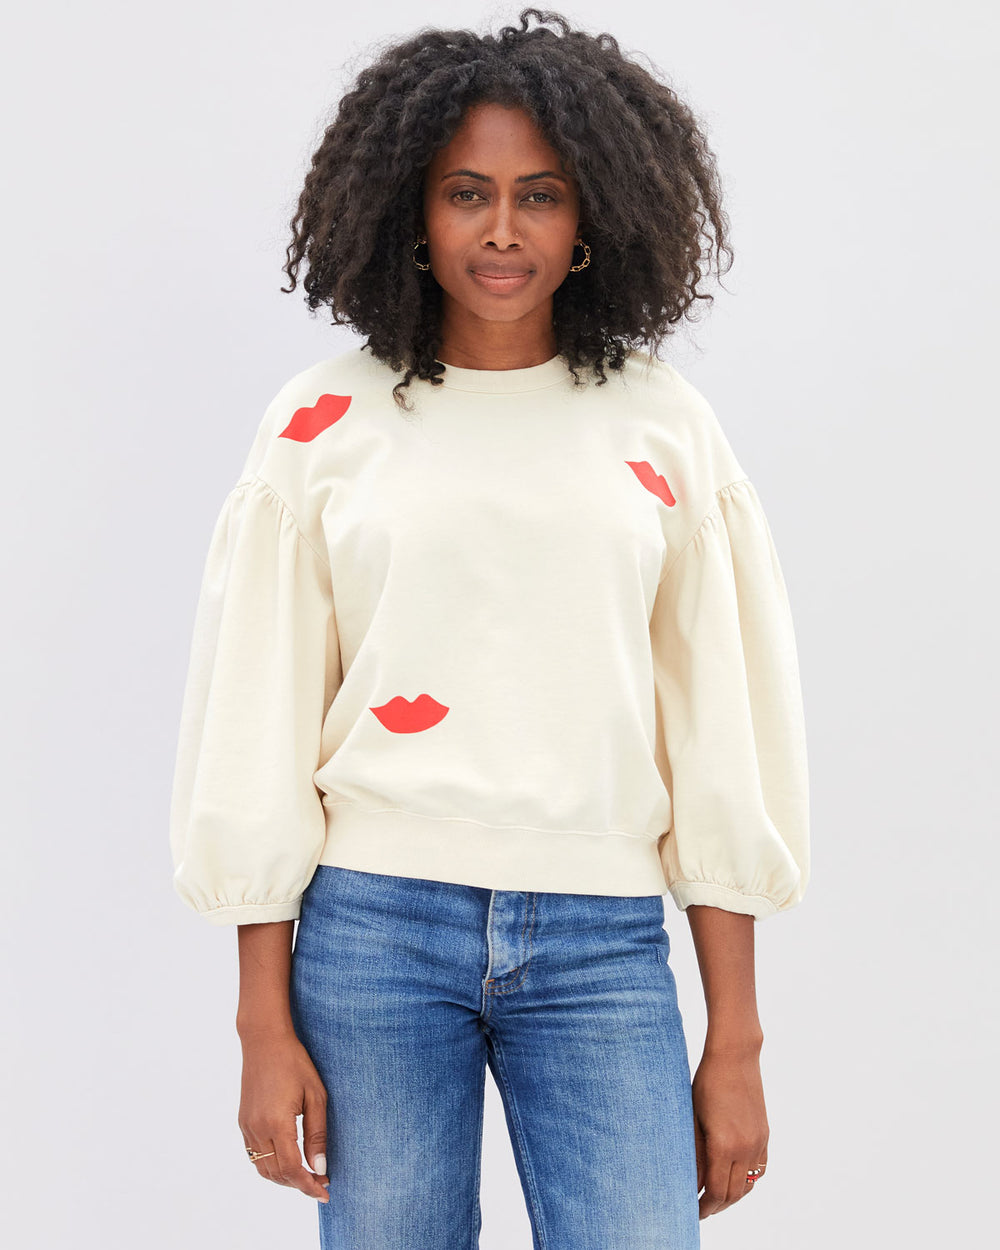 Mecca wearing the Cream with Lips Drop Shoulder Sweatshirt untucked with blue denim jeans.